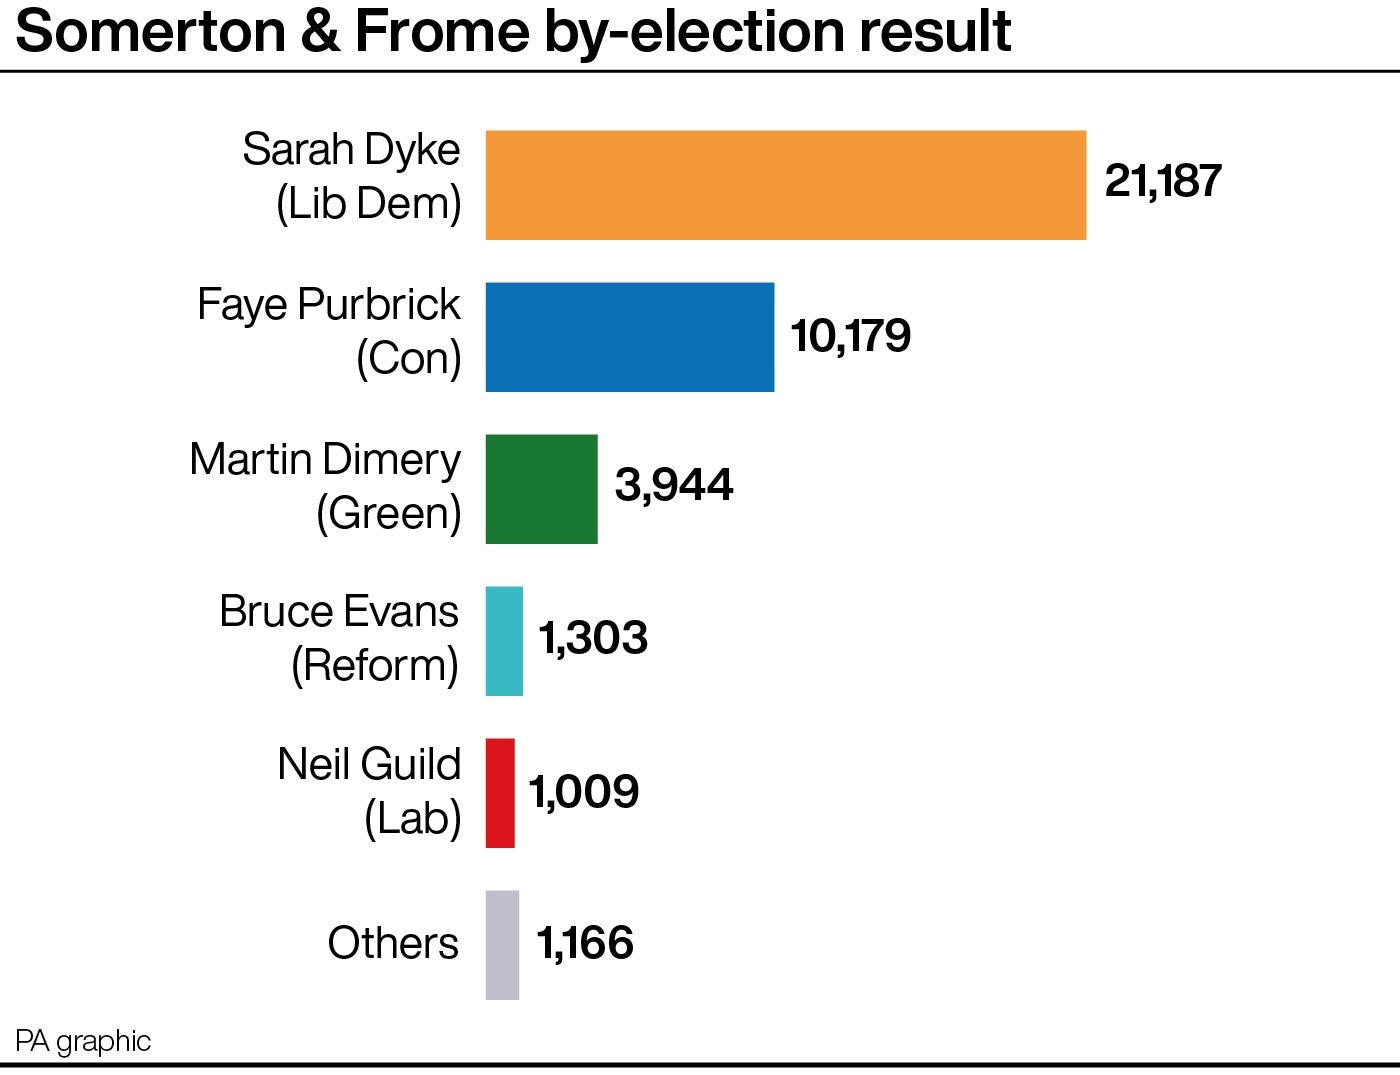 The Somerton and Frome by-election result